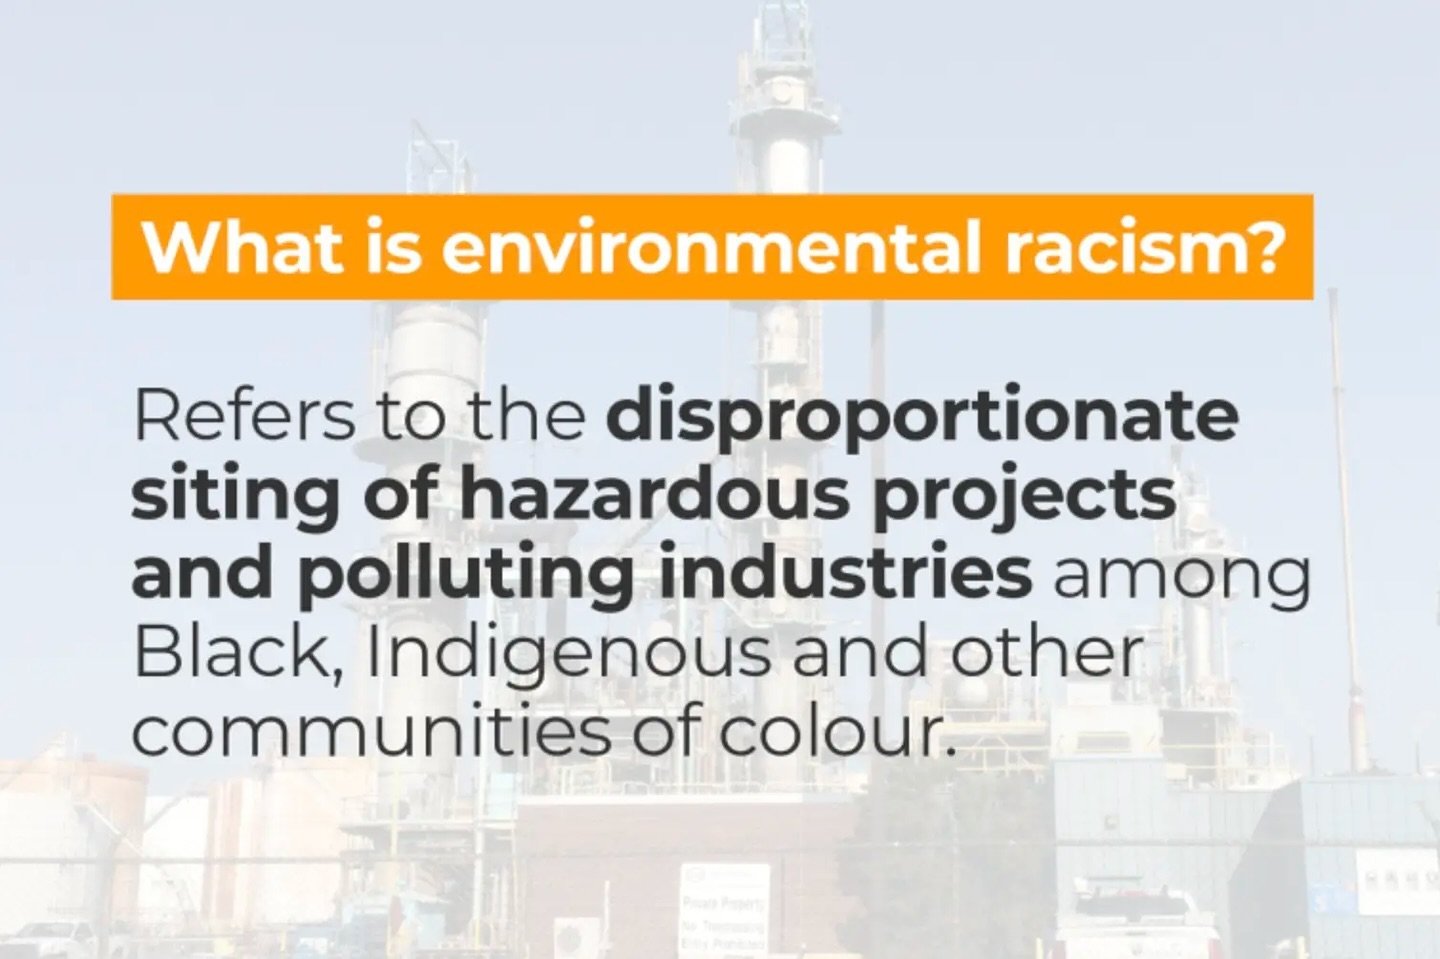 We know this all too well in Brookhaven.

#environmentalracism #environmentaljustice #socialjustice